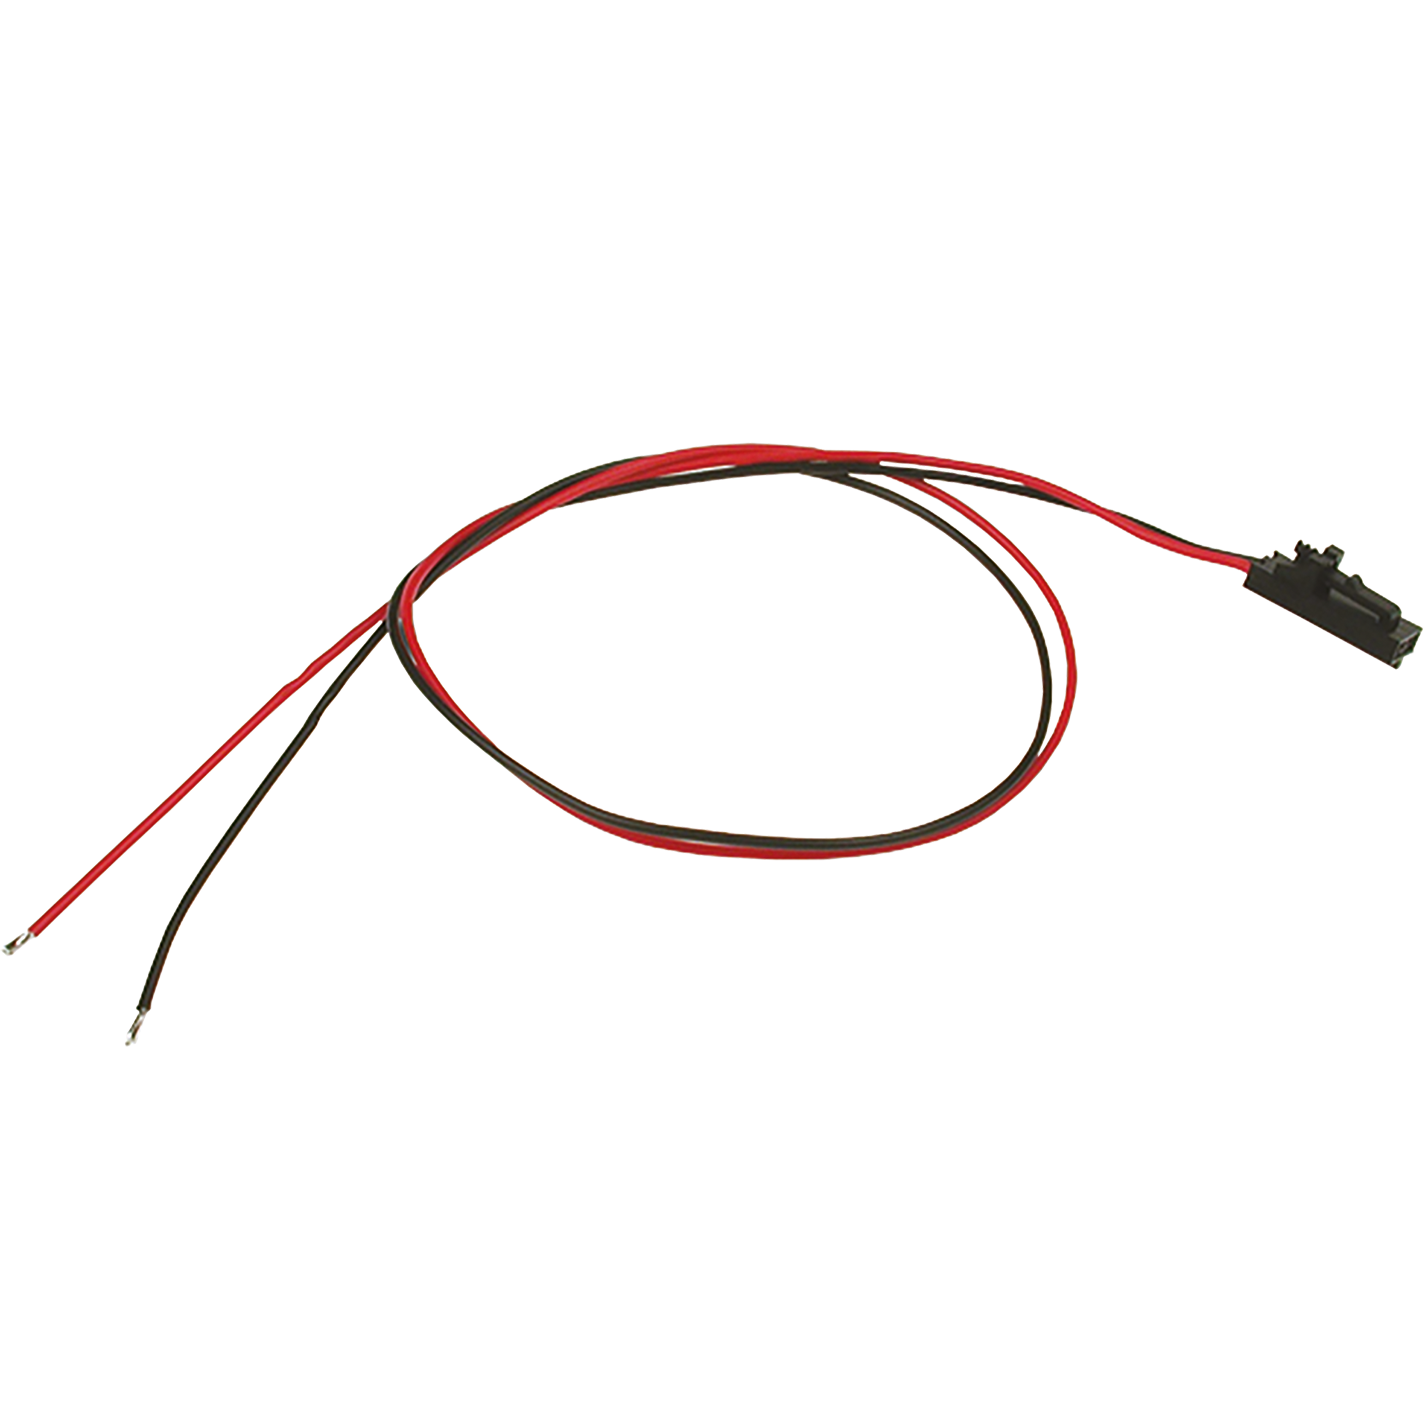 PLUG IN CONNECTOR 300MM LEADS